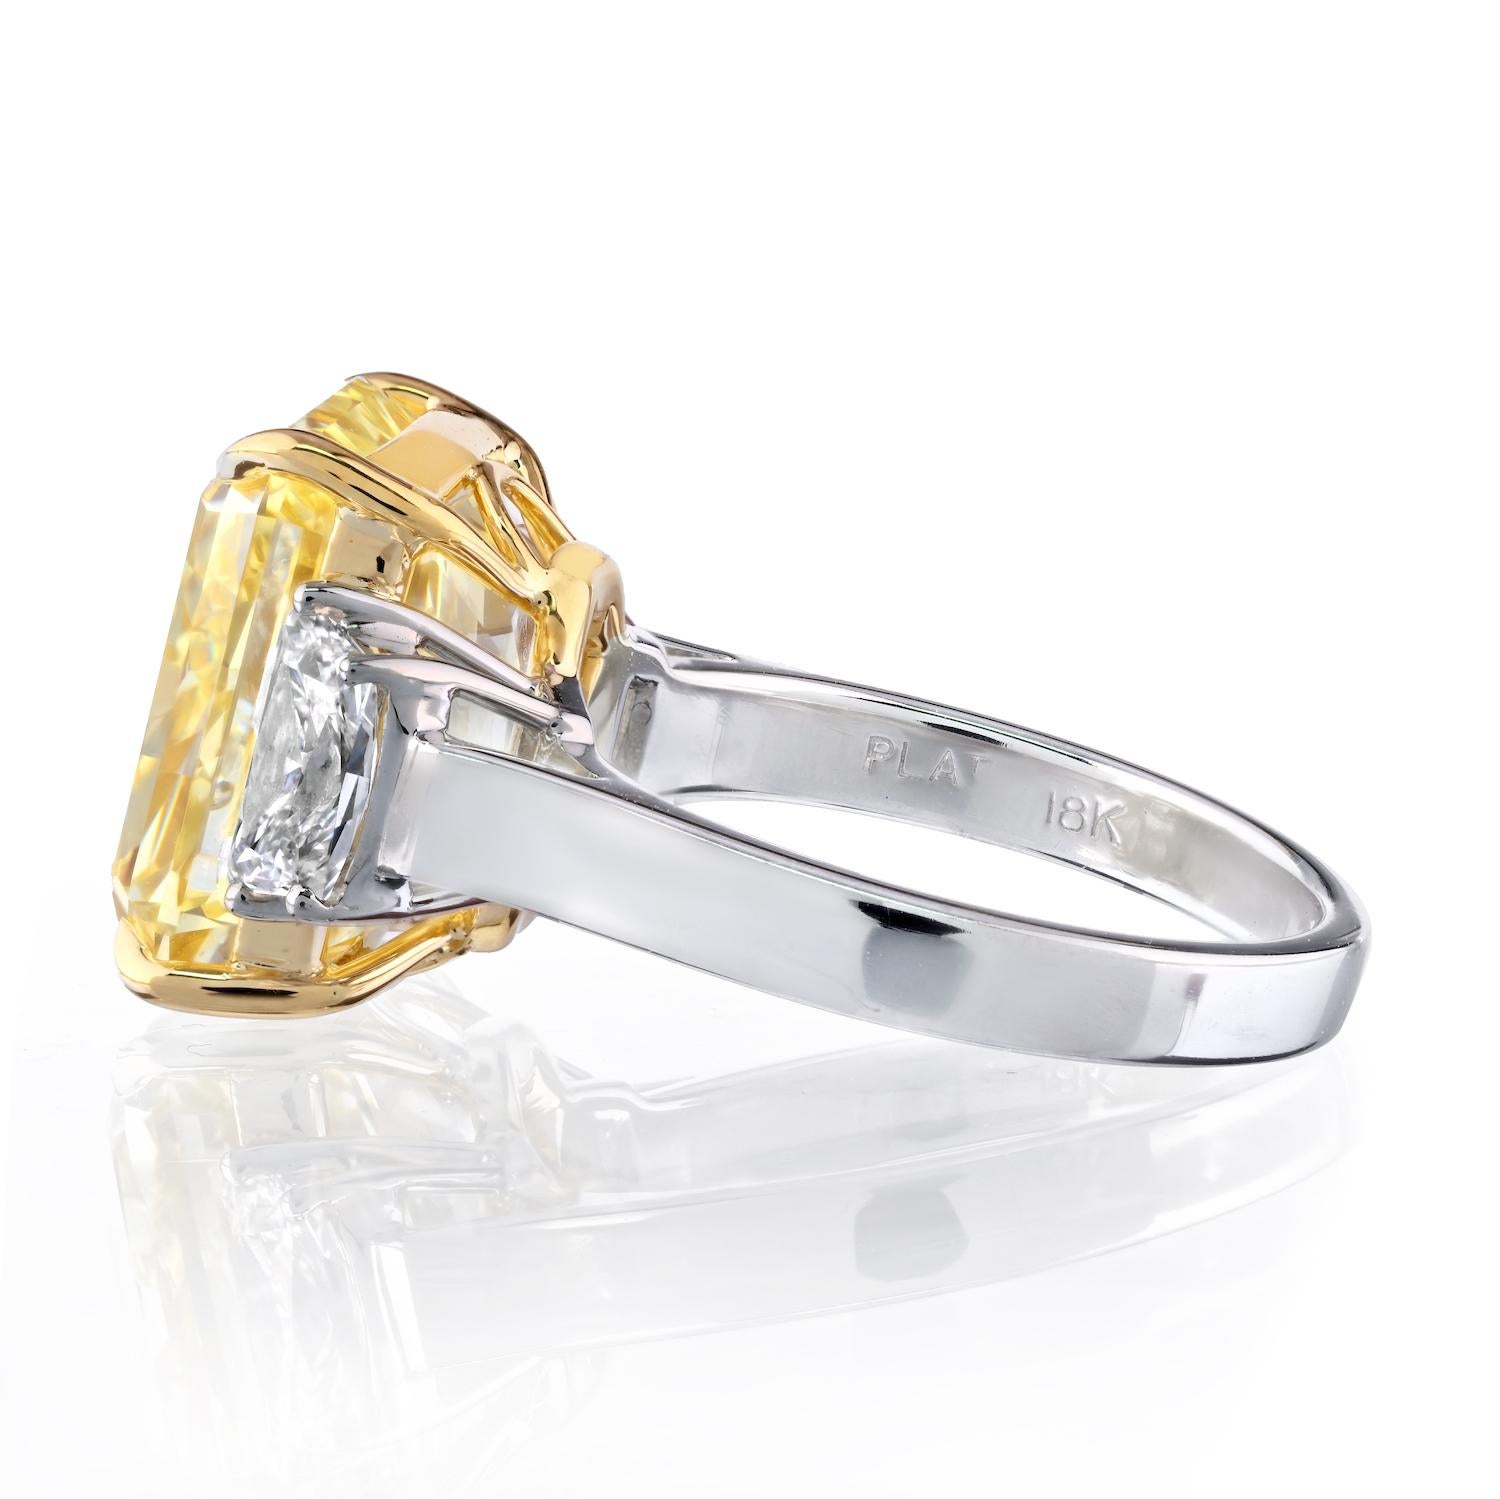 12 Carat Fancy Intense Yellow VS1 Radiant Cut Diamond Three Stone Platinum Ring In New Condition For Sale In New York, NY